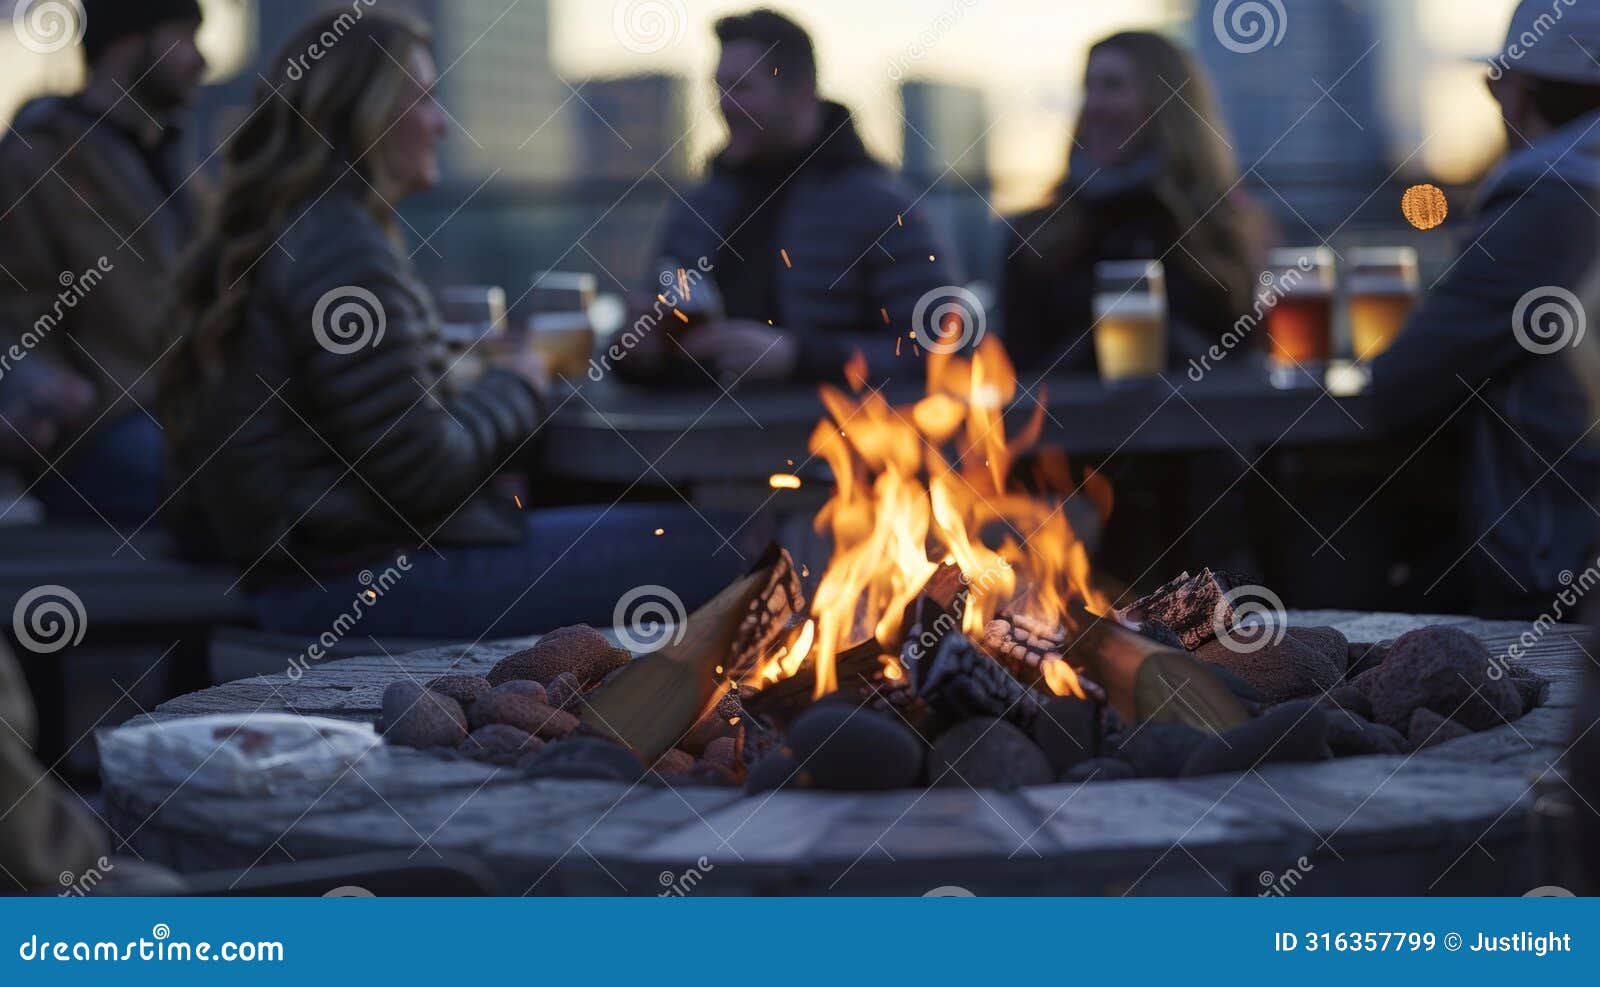 in the corner a crackling fire pit warms the cool rooftop air as partygoers gather around sipping on tails and gazing at